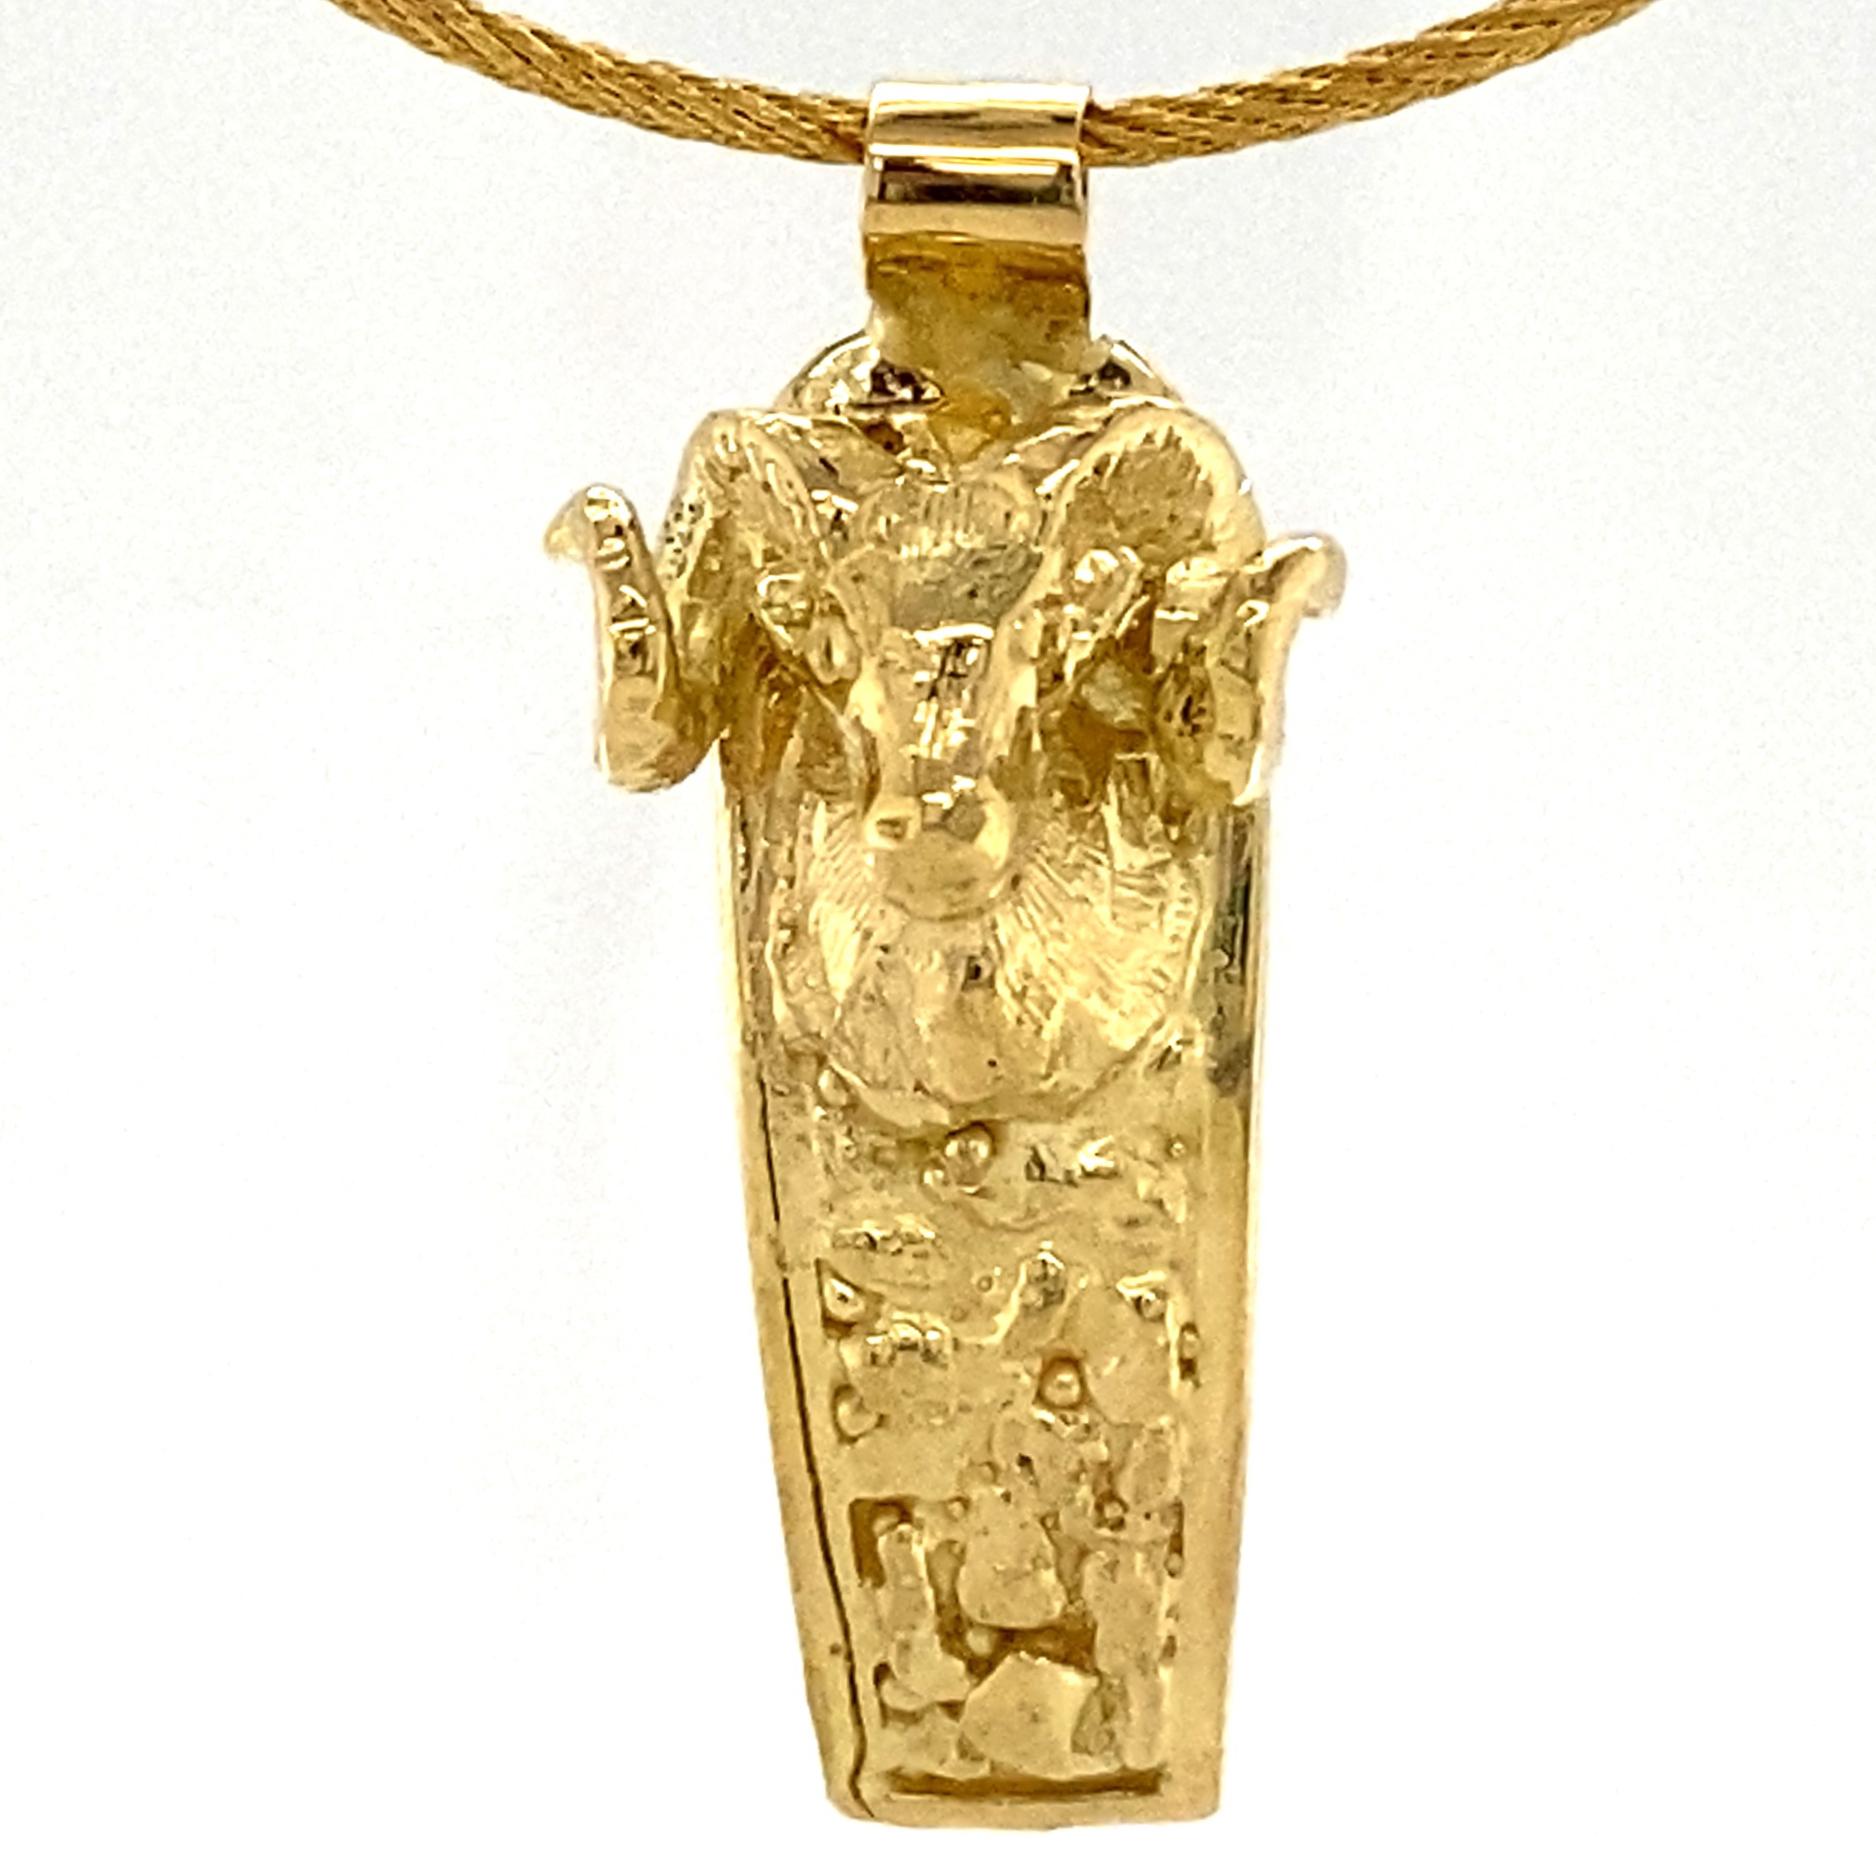 Eytan Brandes modeled this pendant from an old sterling silver bracelet link.  It looks oodles better as a pendant and in 18 karat yellow gold.  It's perfect for an Aries, or for someone who is rampantly rambunctious, or for someone wooly-headed, or